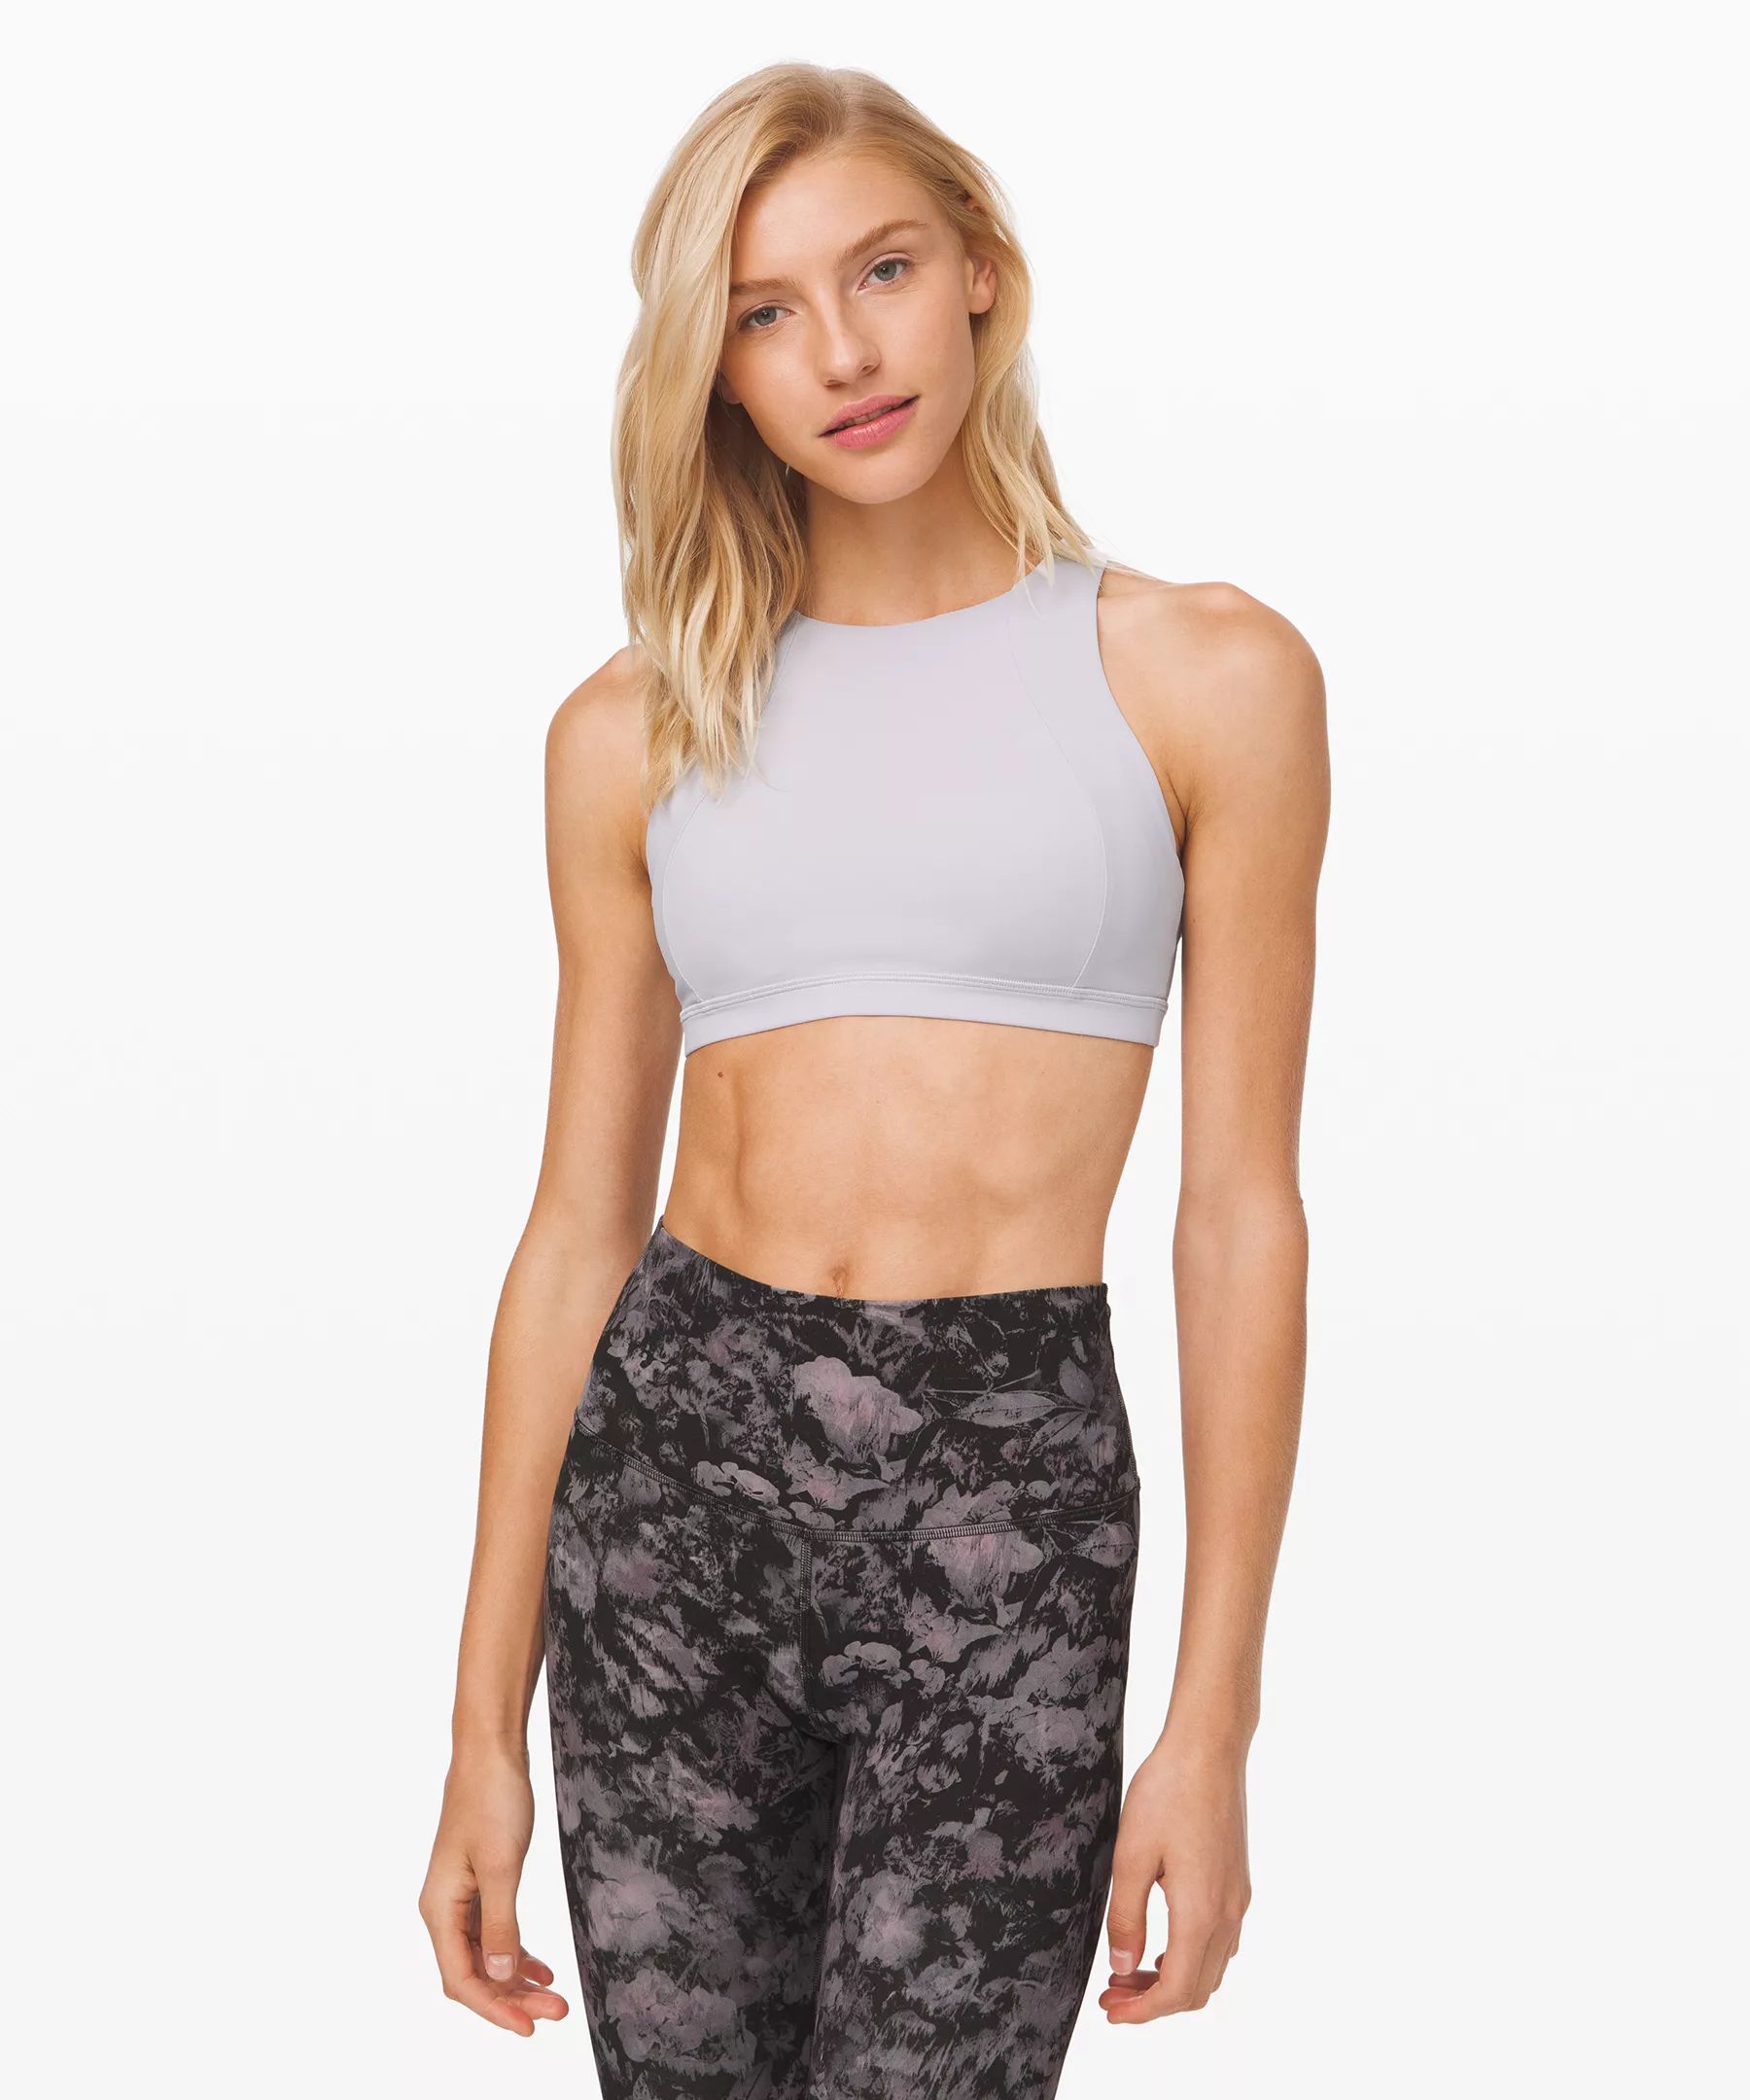 Free To Be Serene Bra High NeckLight Support, C/D Cup | Lululemon (US)